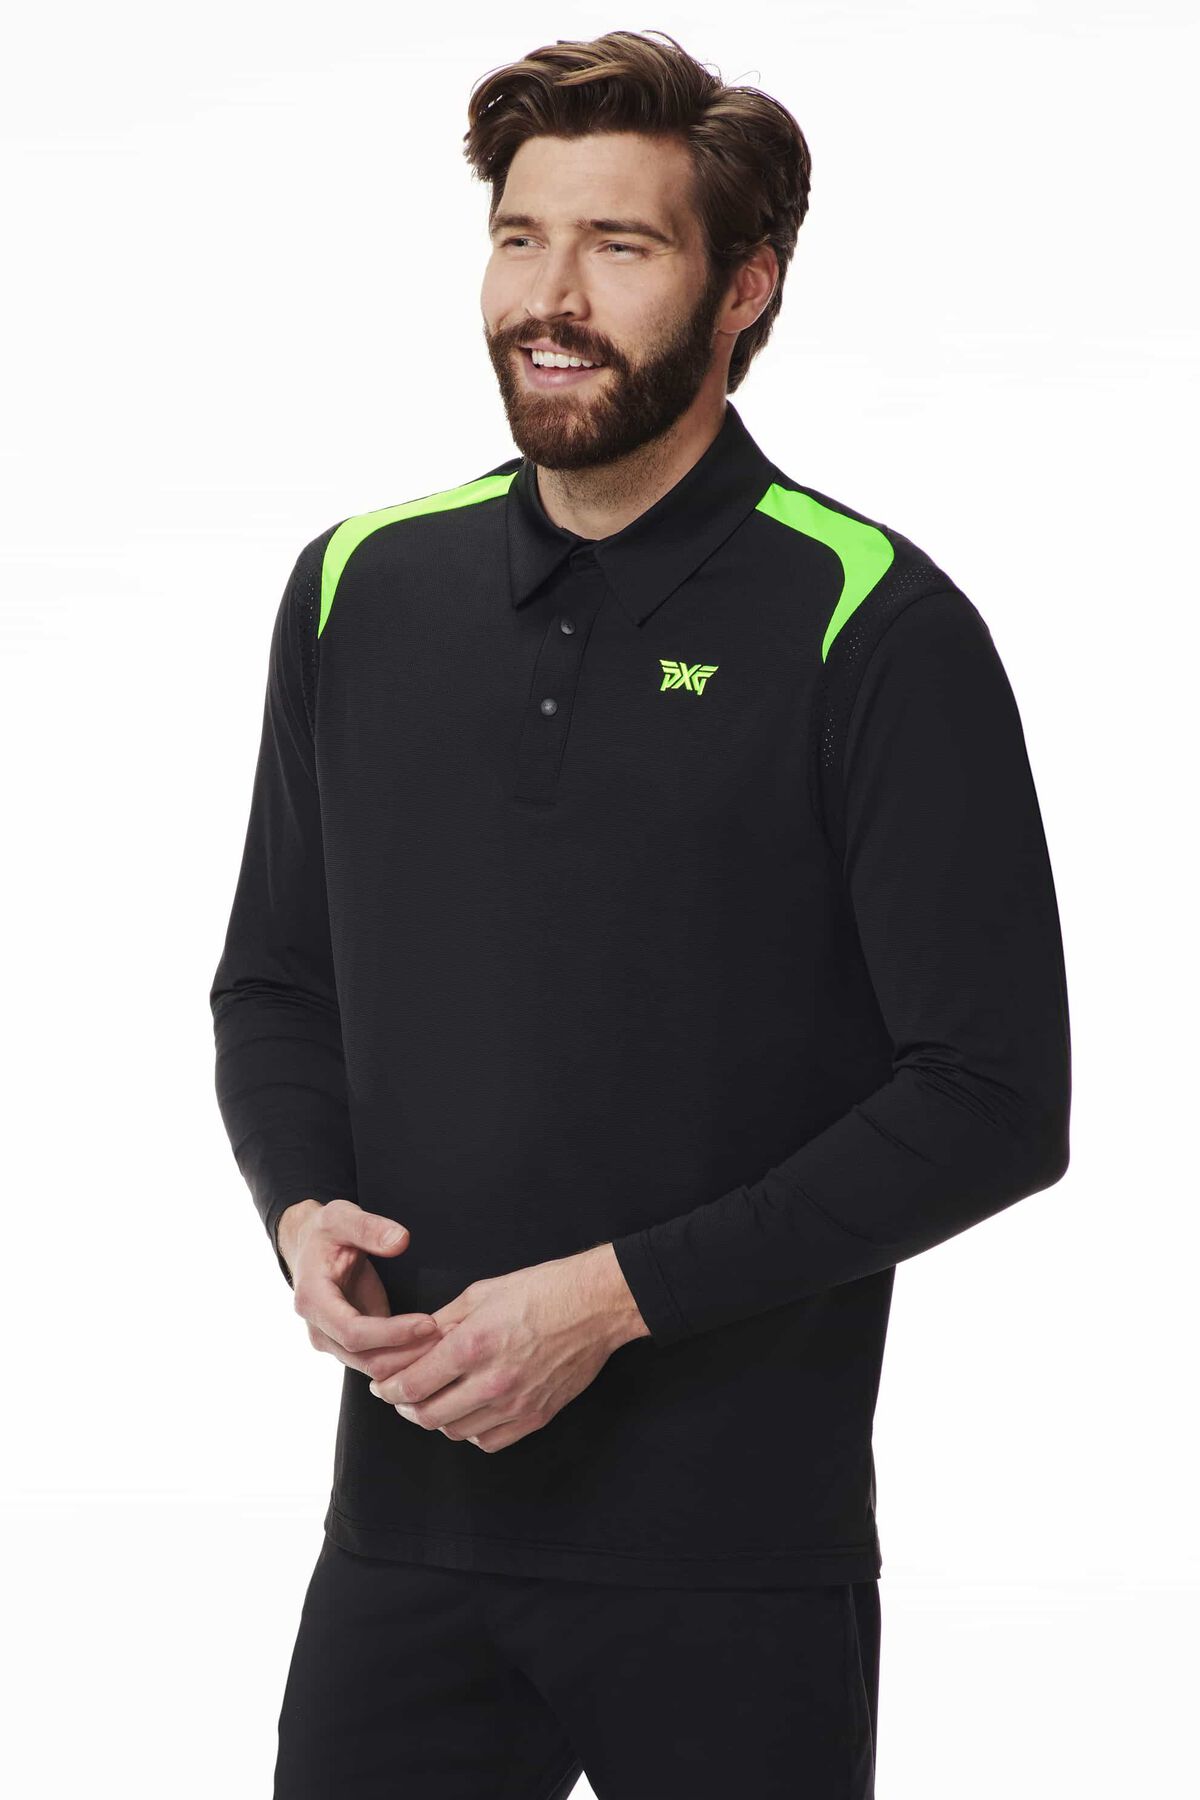 https://www.pxg.com/dw/image/v2/BFXB_PRD/on/demandware.static/-/Sites-pxg-master/default/dwf031dd3a/images/hi-res/apparel/mens/tops/shirts%20and%20polos/Long%20Sleeve%20Airo%20Lightweight%20Polo/Mens-Long-Sleeve-Airo-Lightweight-Polo-Side-HiRes-v3-50.jpg?sw=1200